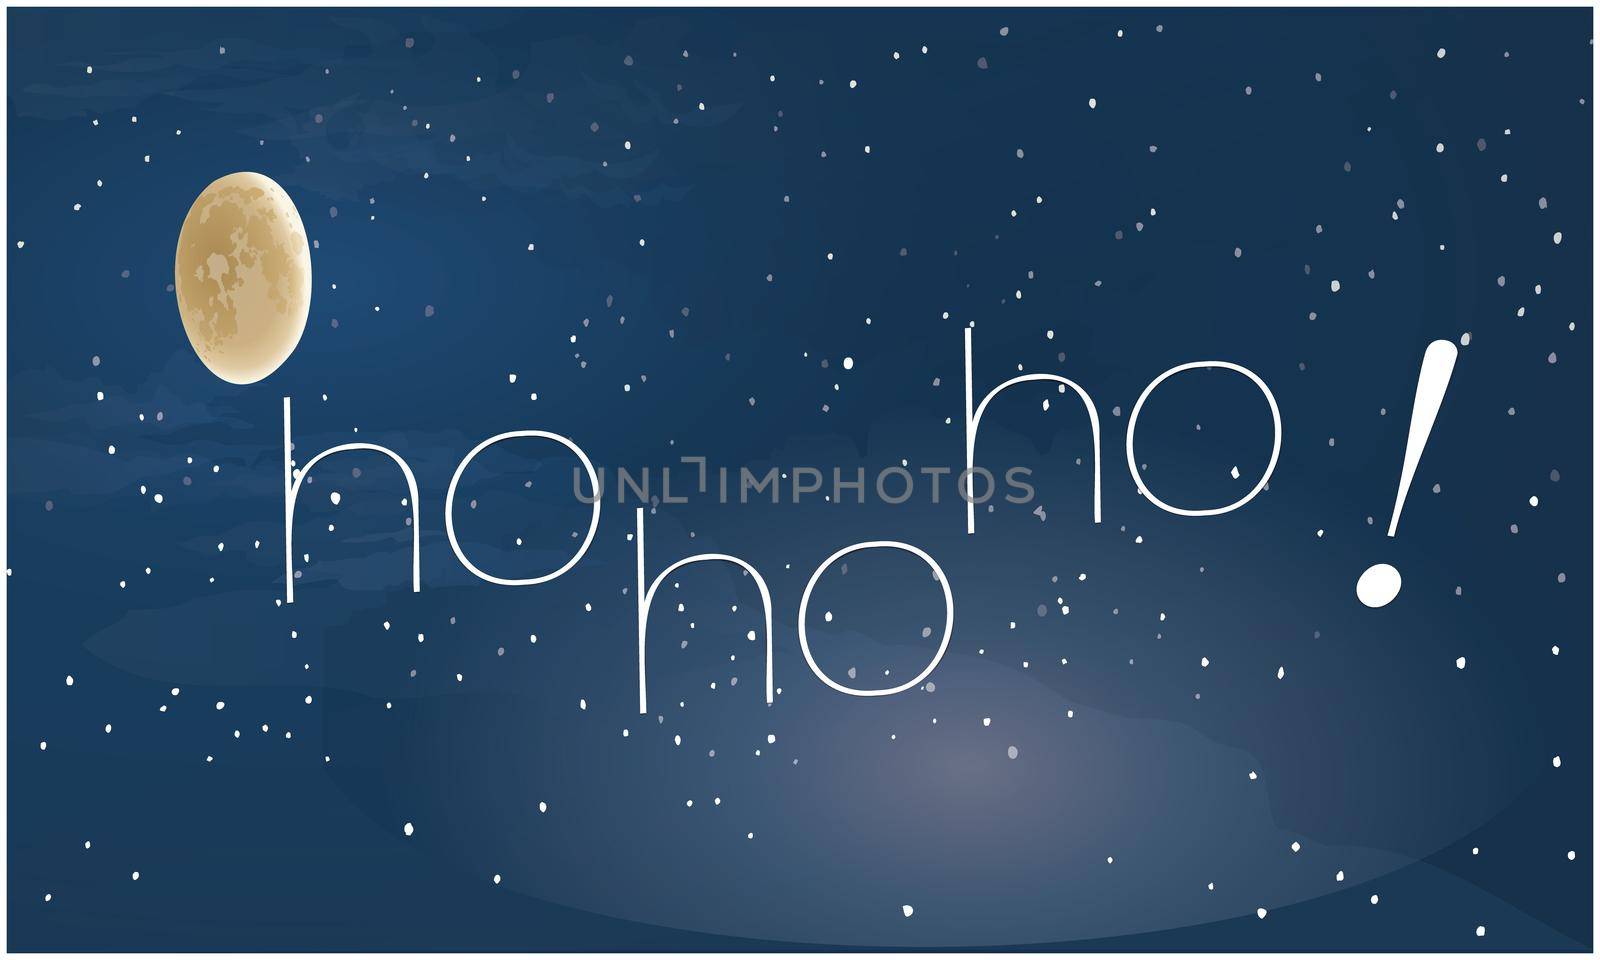 Christmas Illustration on abstract moon and stars background by aanavcreationsplus